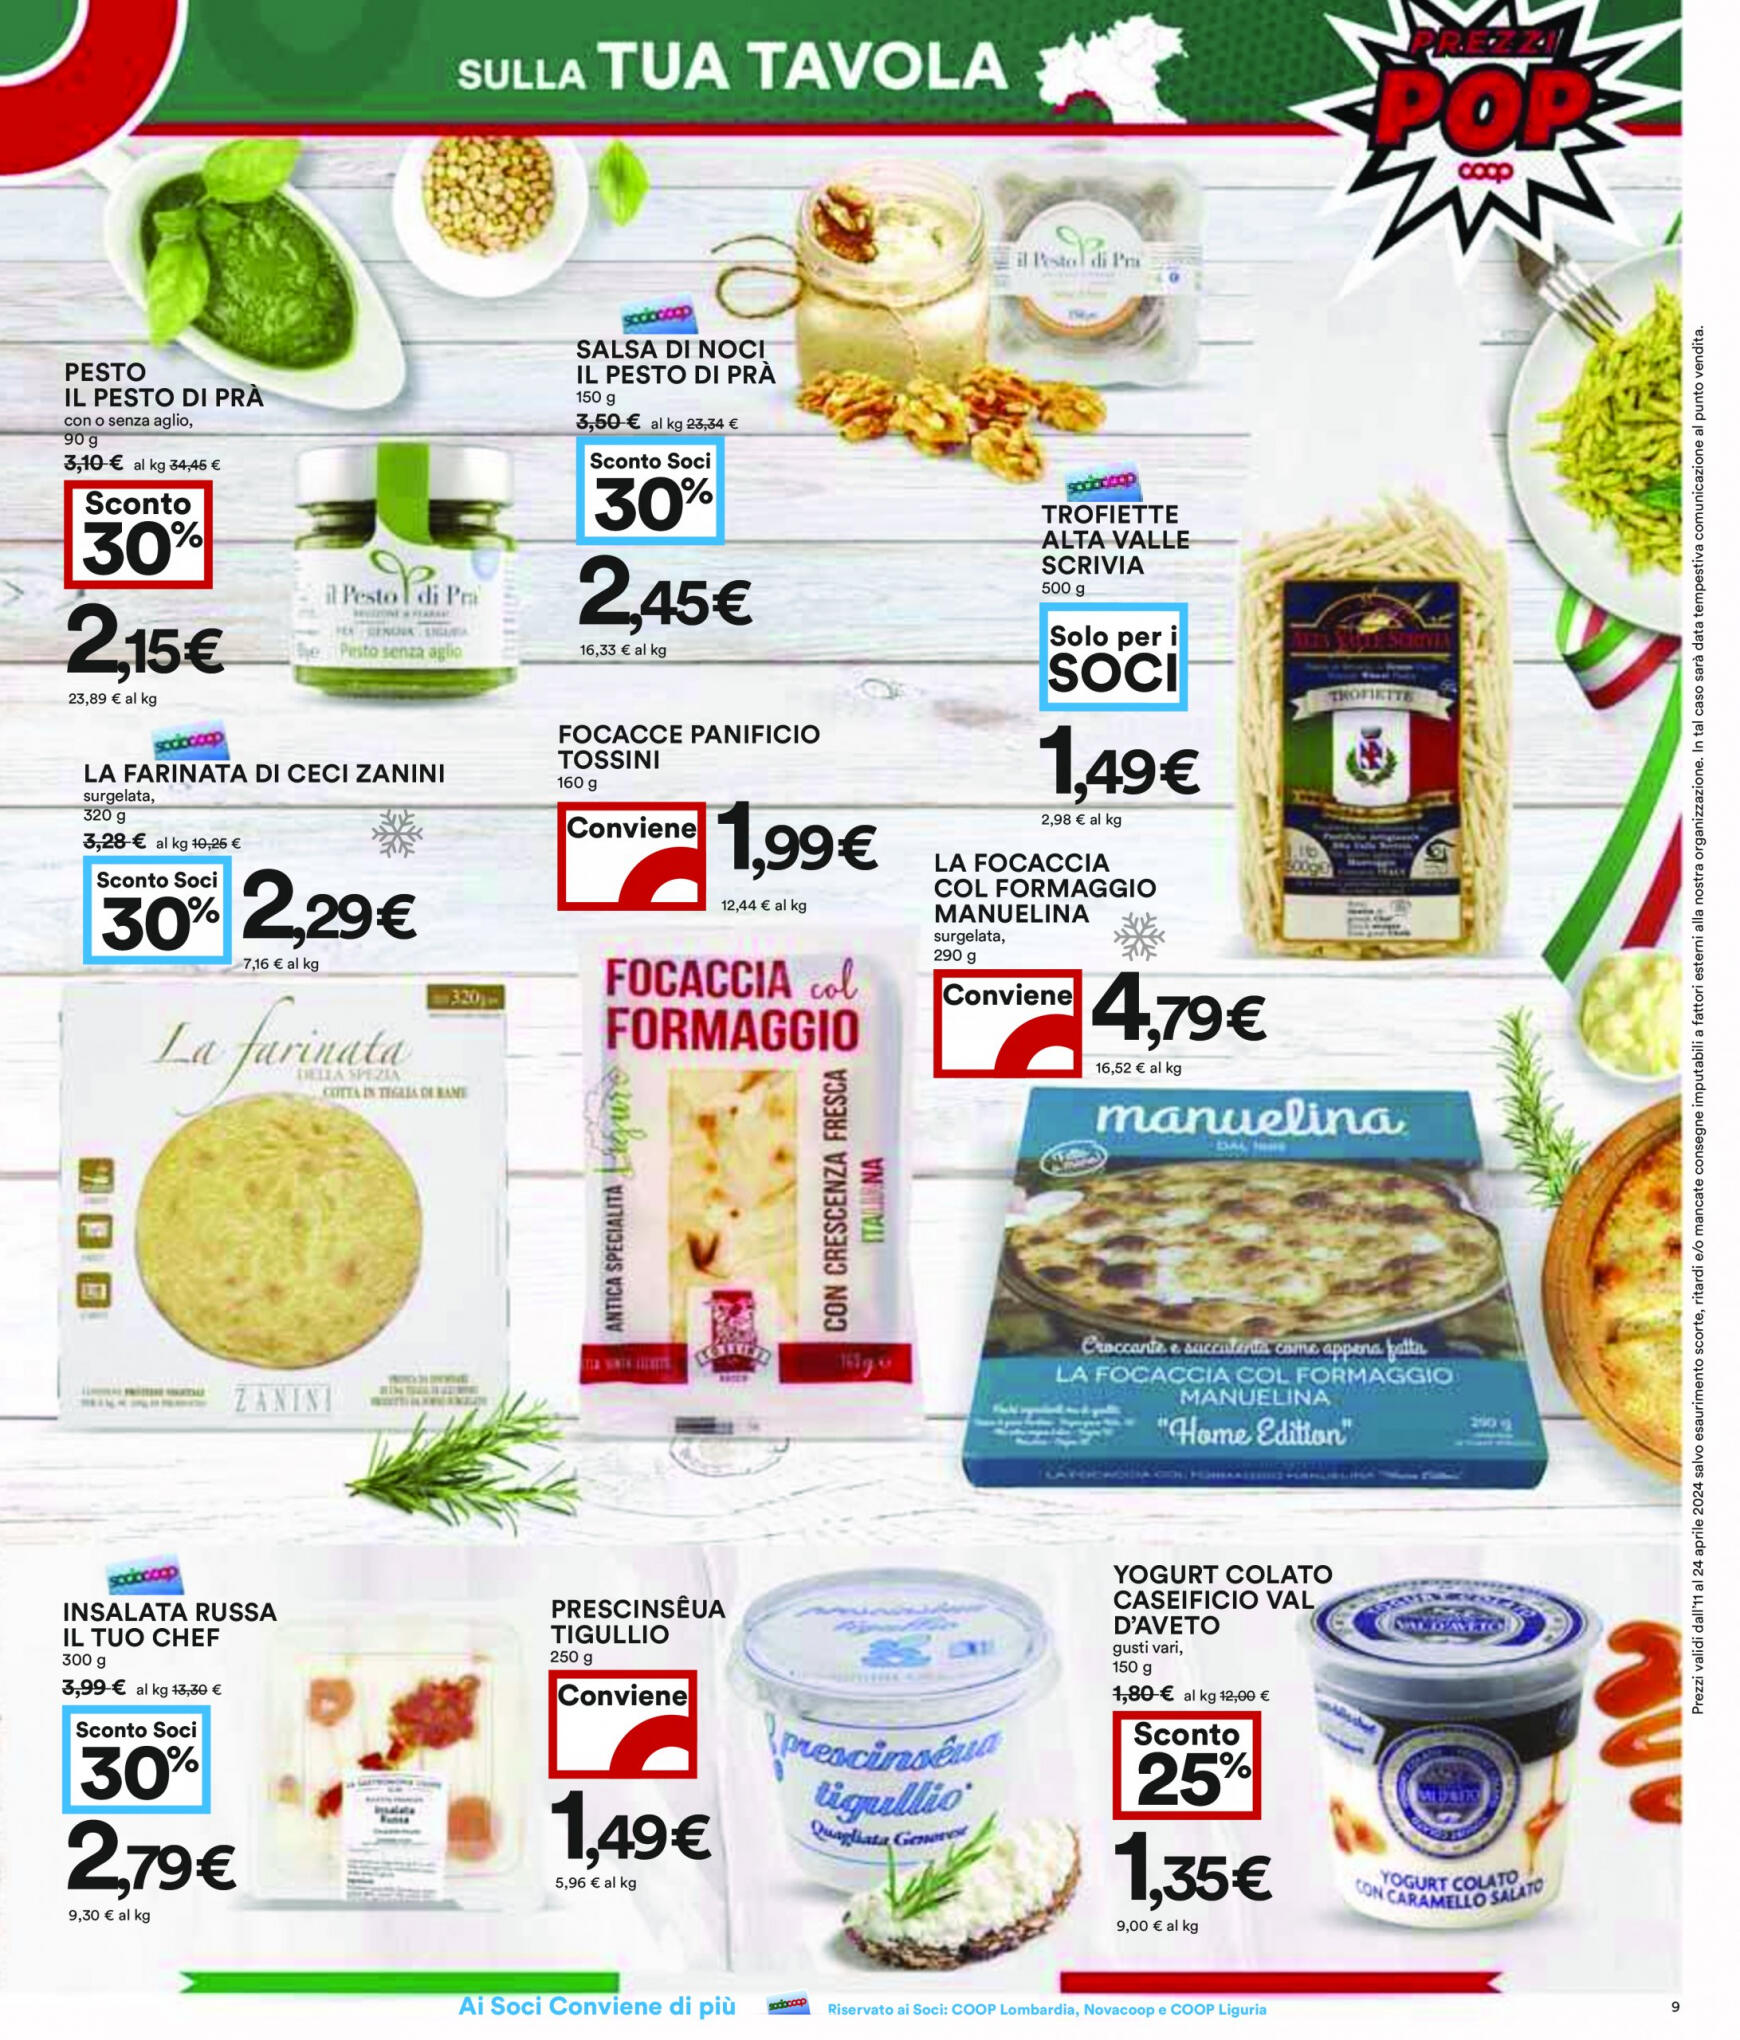 coop - Nuovo volantino Coop 11.04. - 24.04. - page: 9